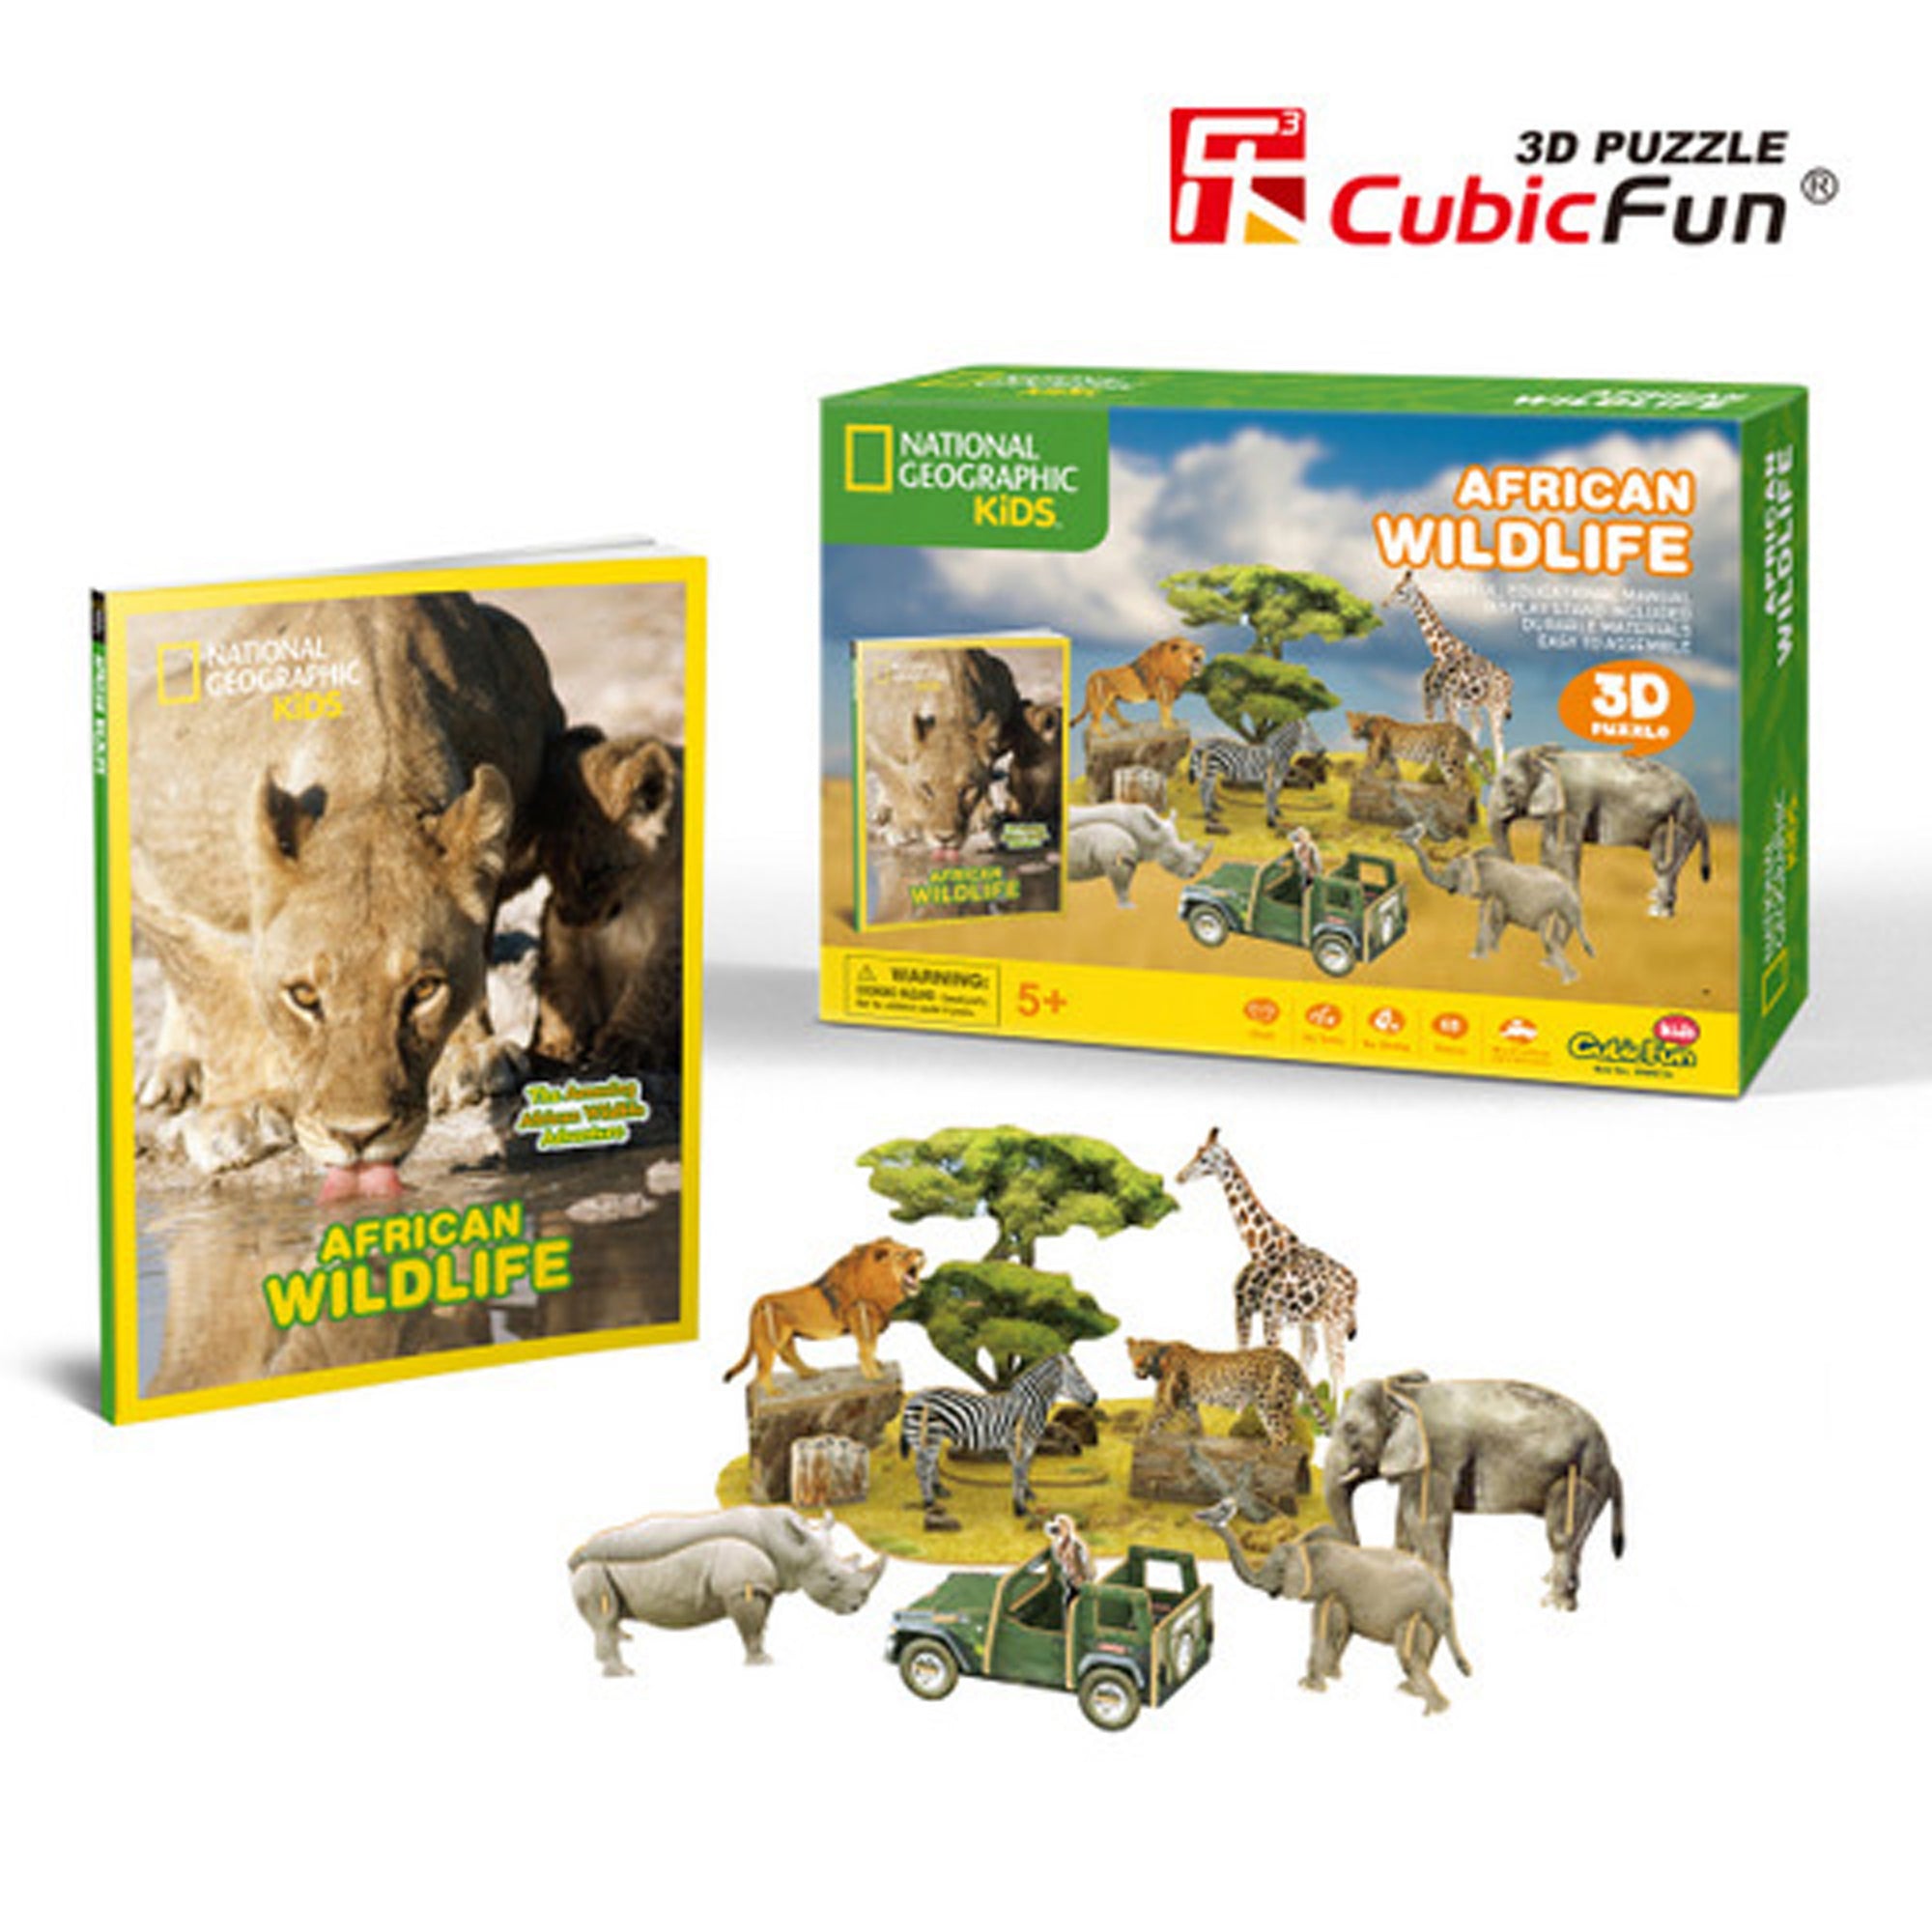 National Geographic - African Wildlife, 3D Puzzle